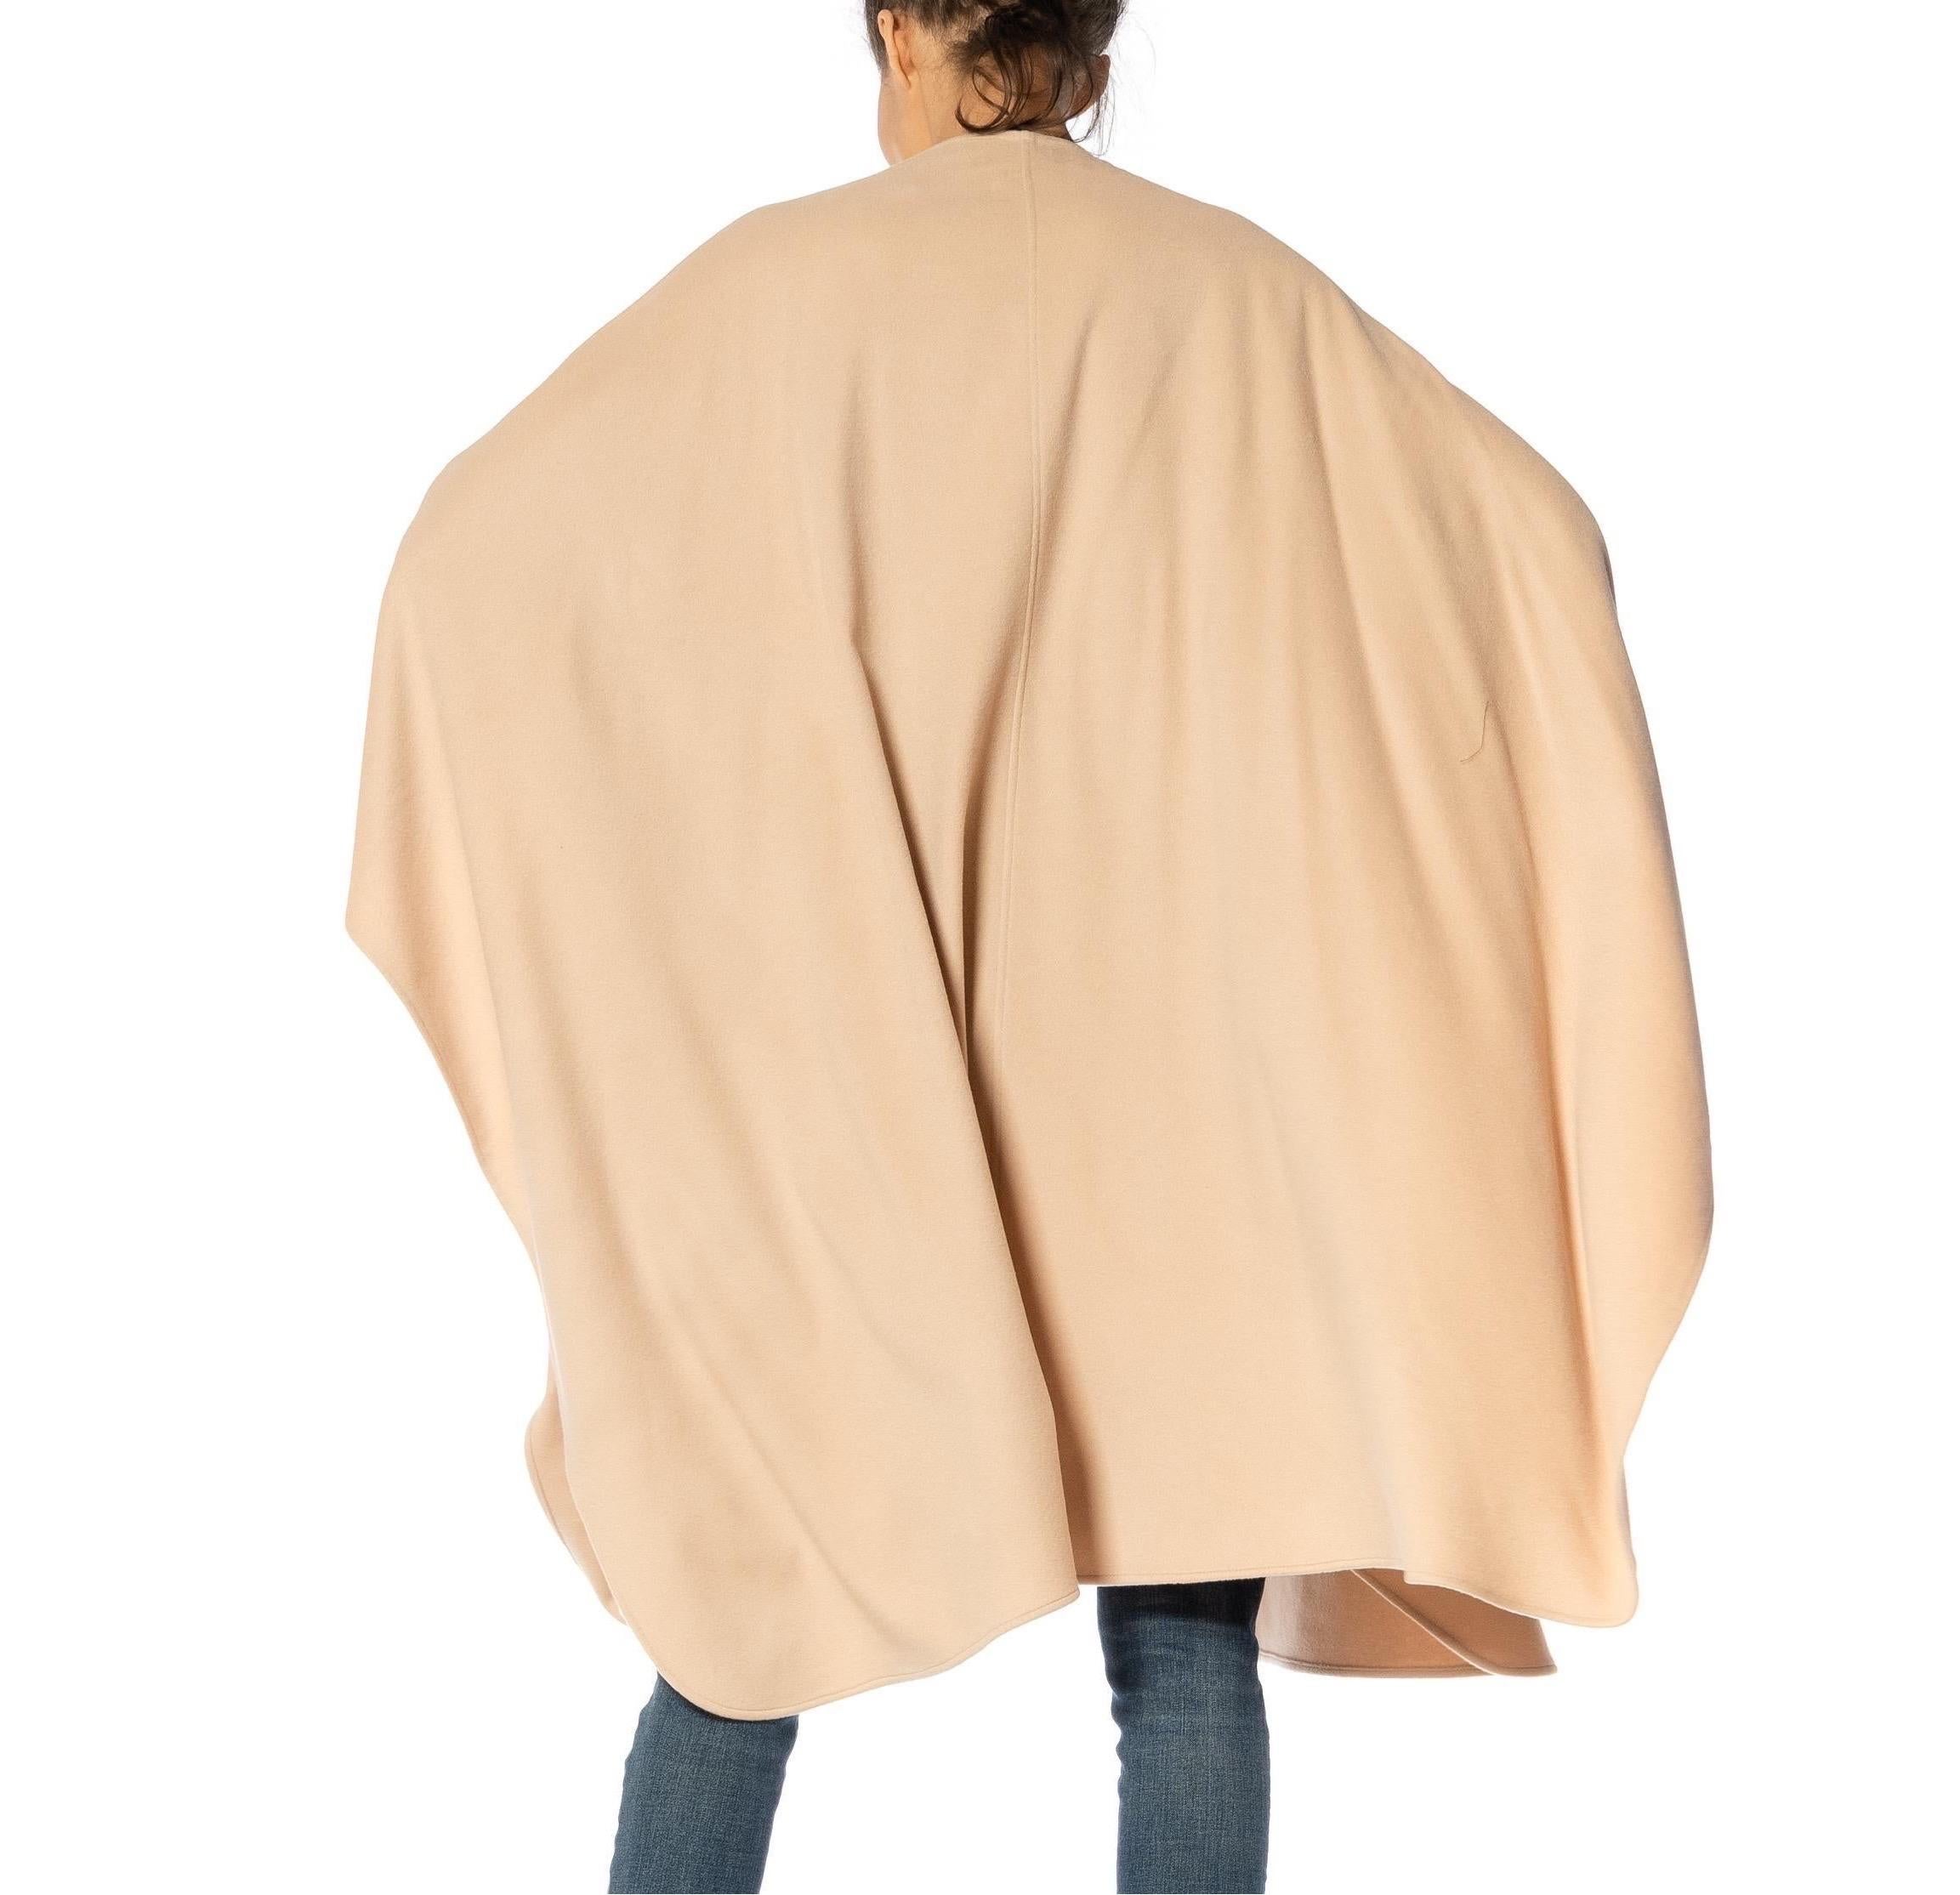 2000S GENNY Beige Cashmere Shawl For Sale 8